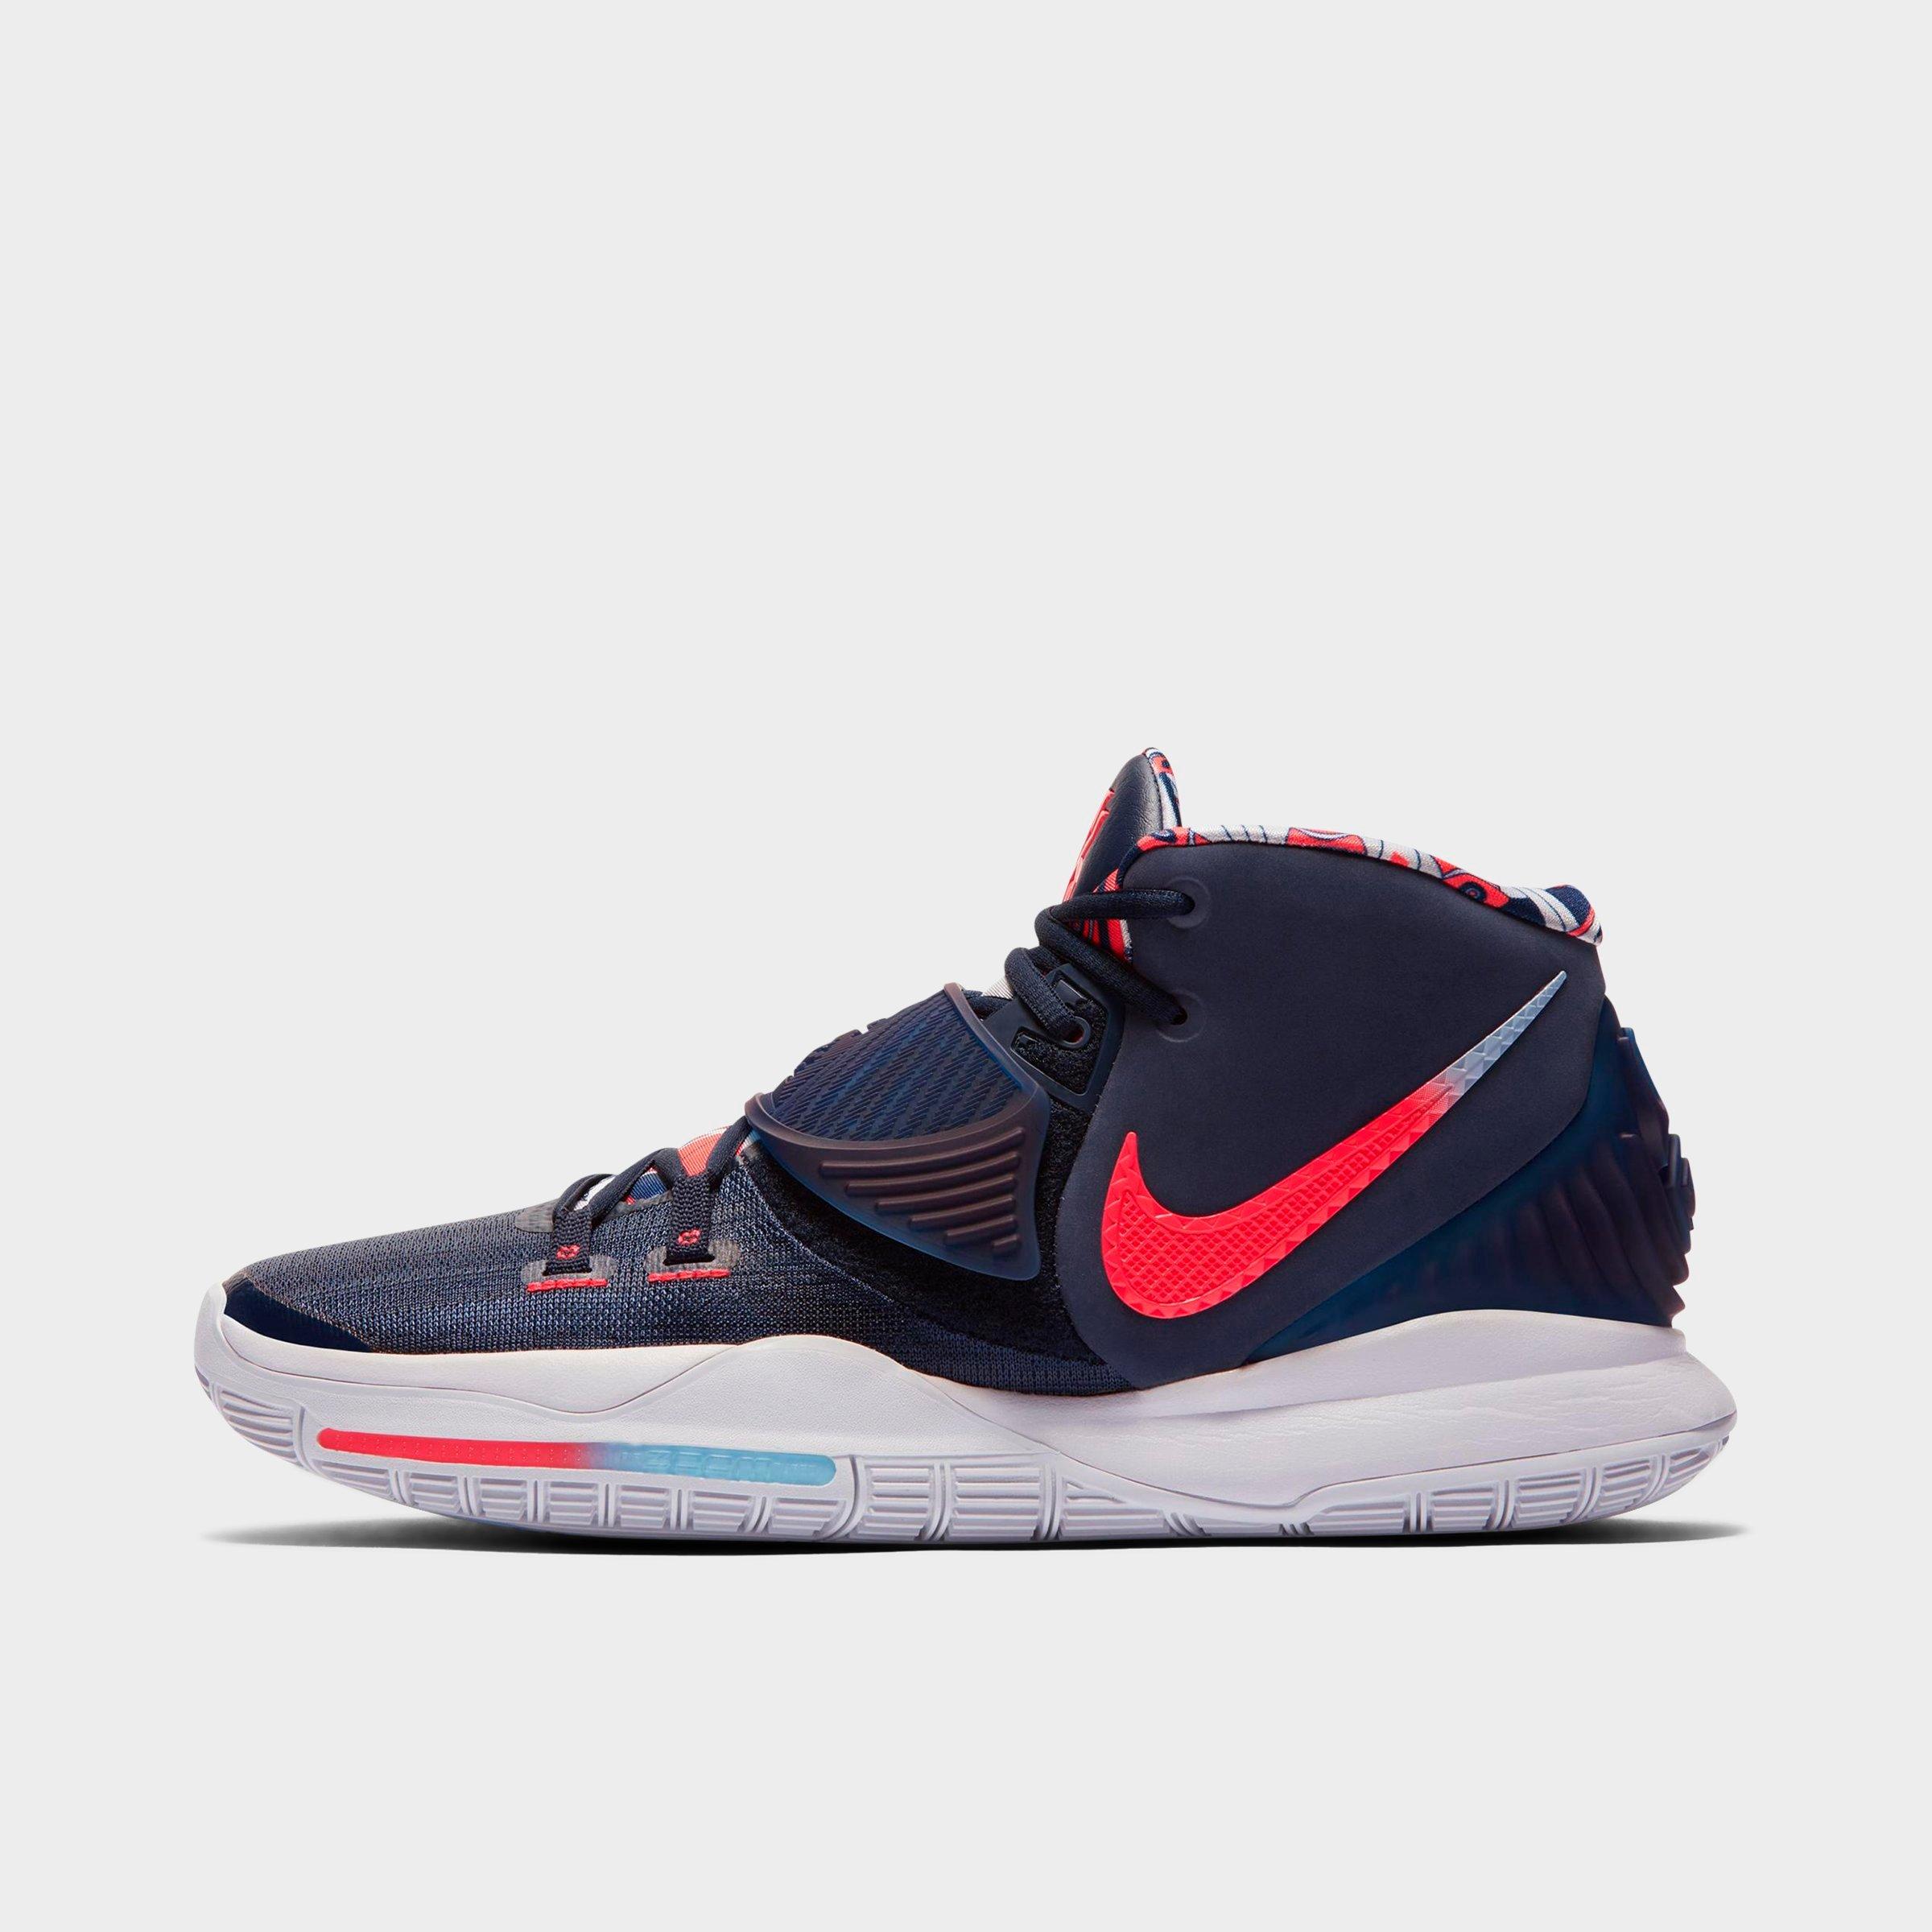 kyrie low finish line